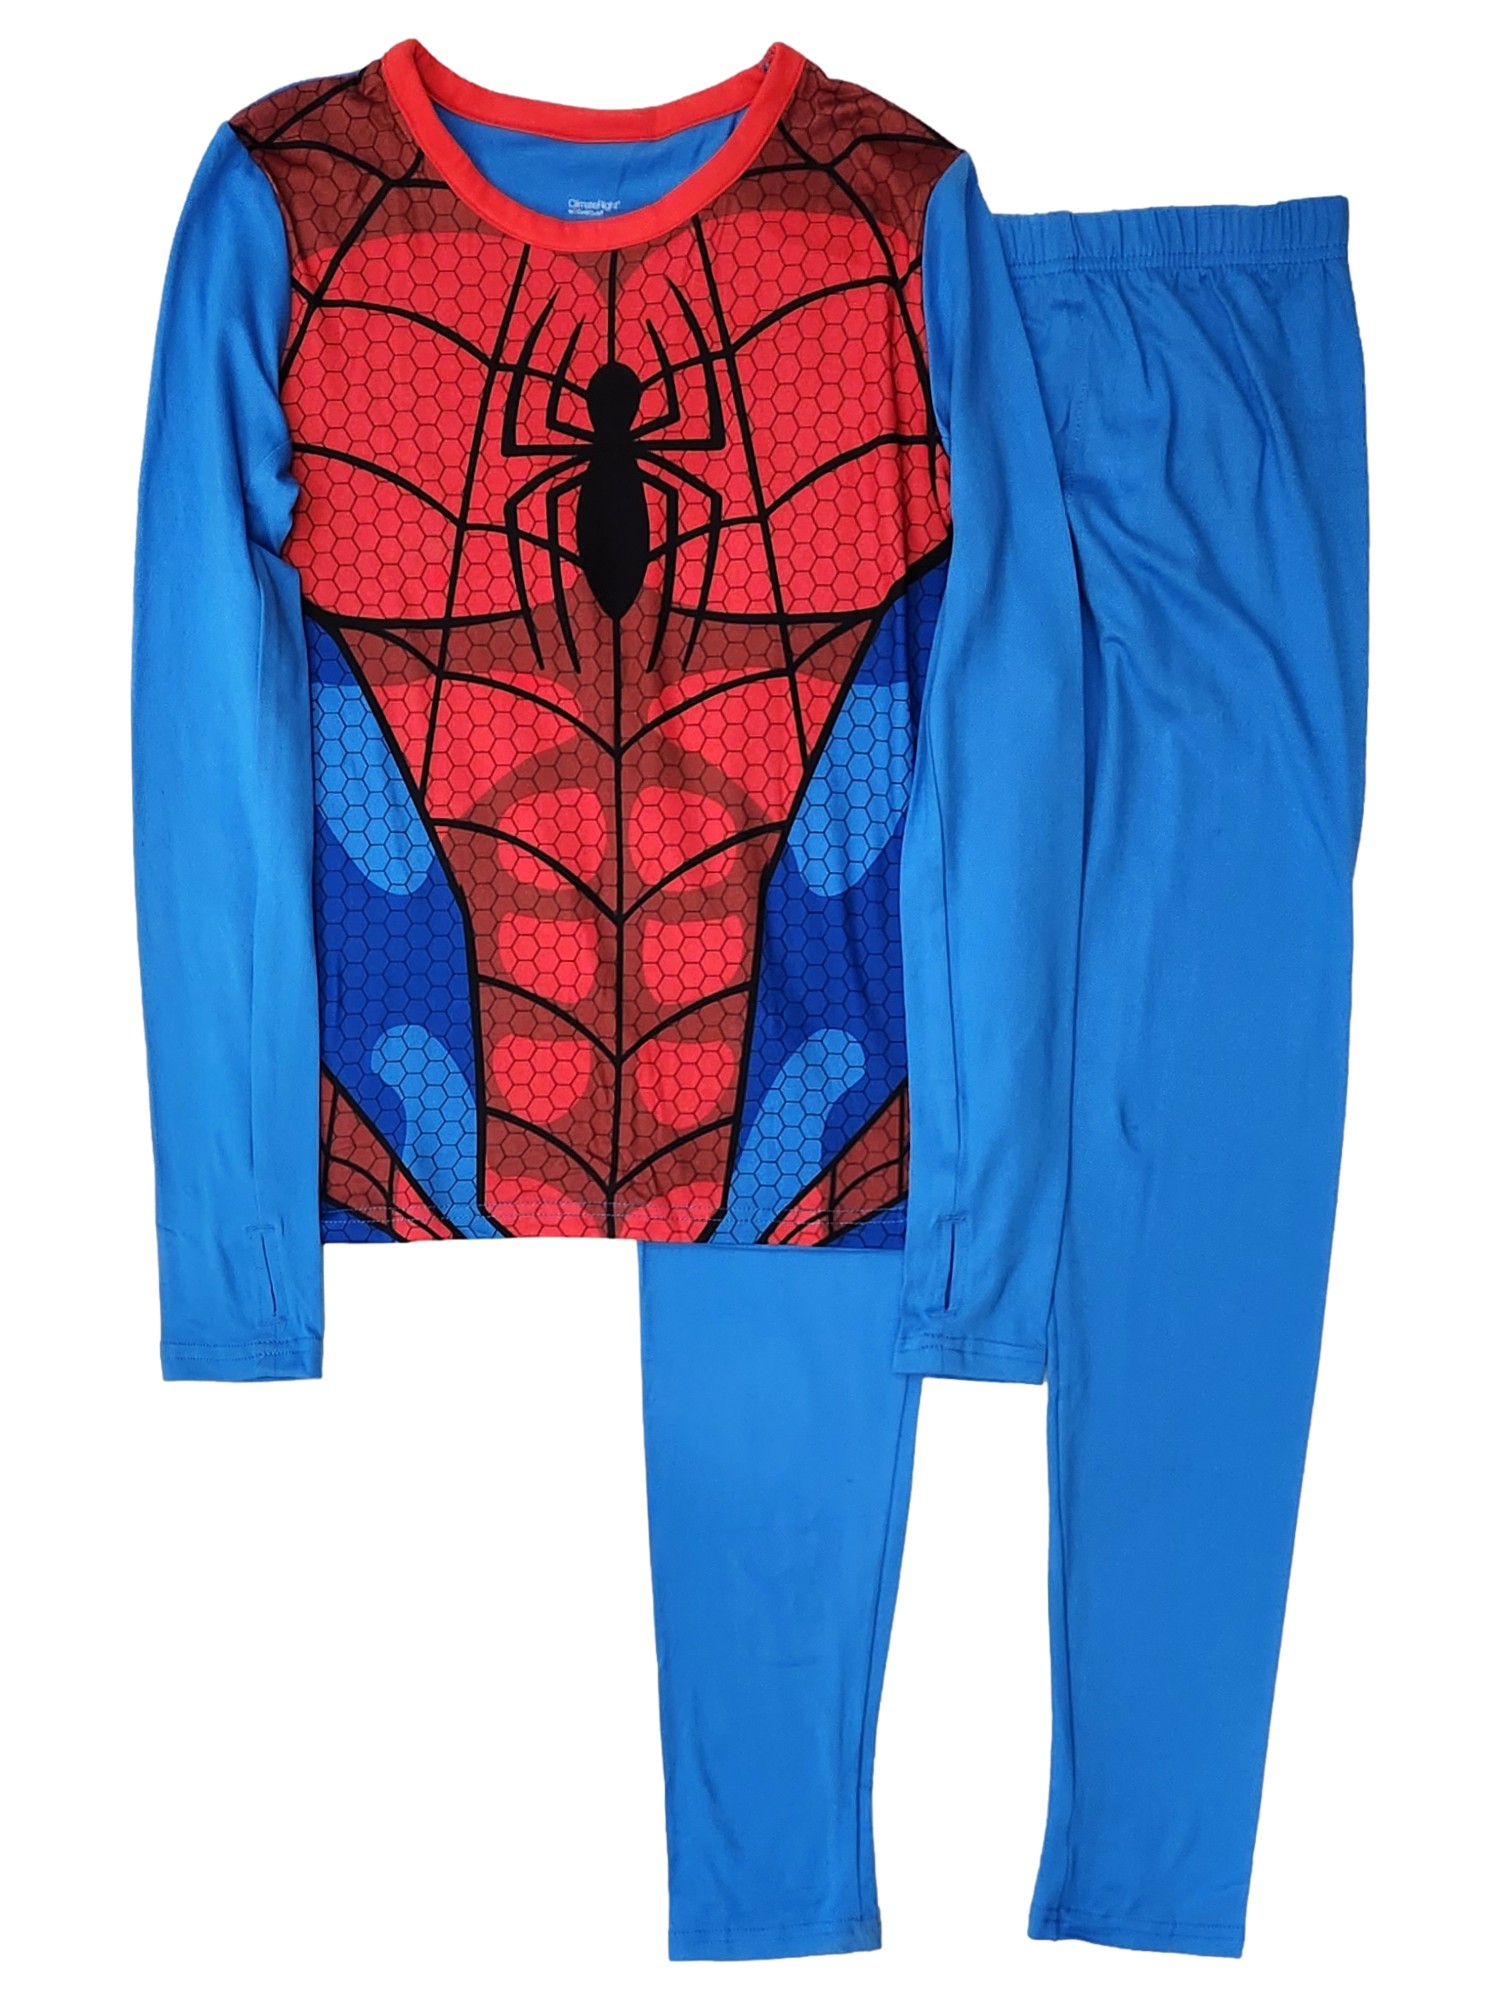 Cuddl Duds Boys Blue & Red Spiderman Thermal Underwear Long Johns Large 10-12